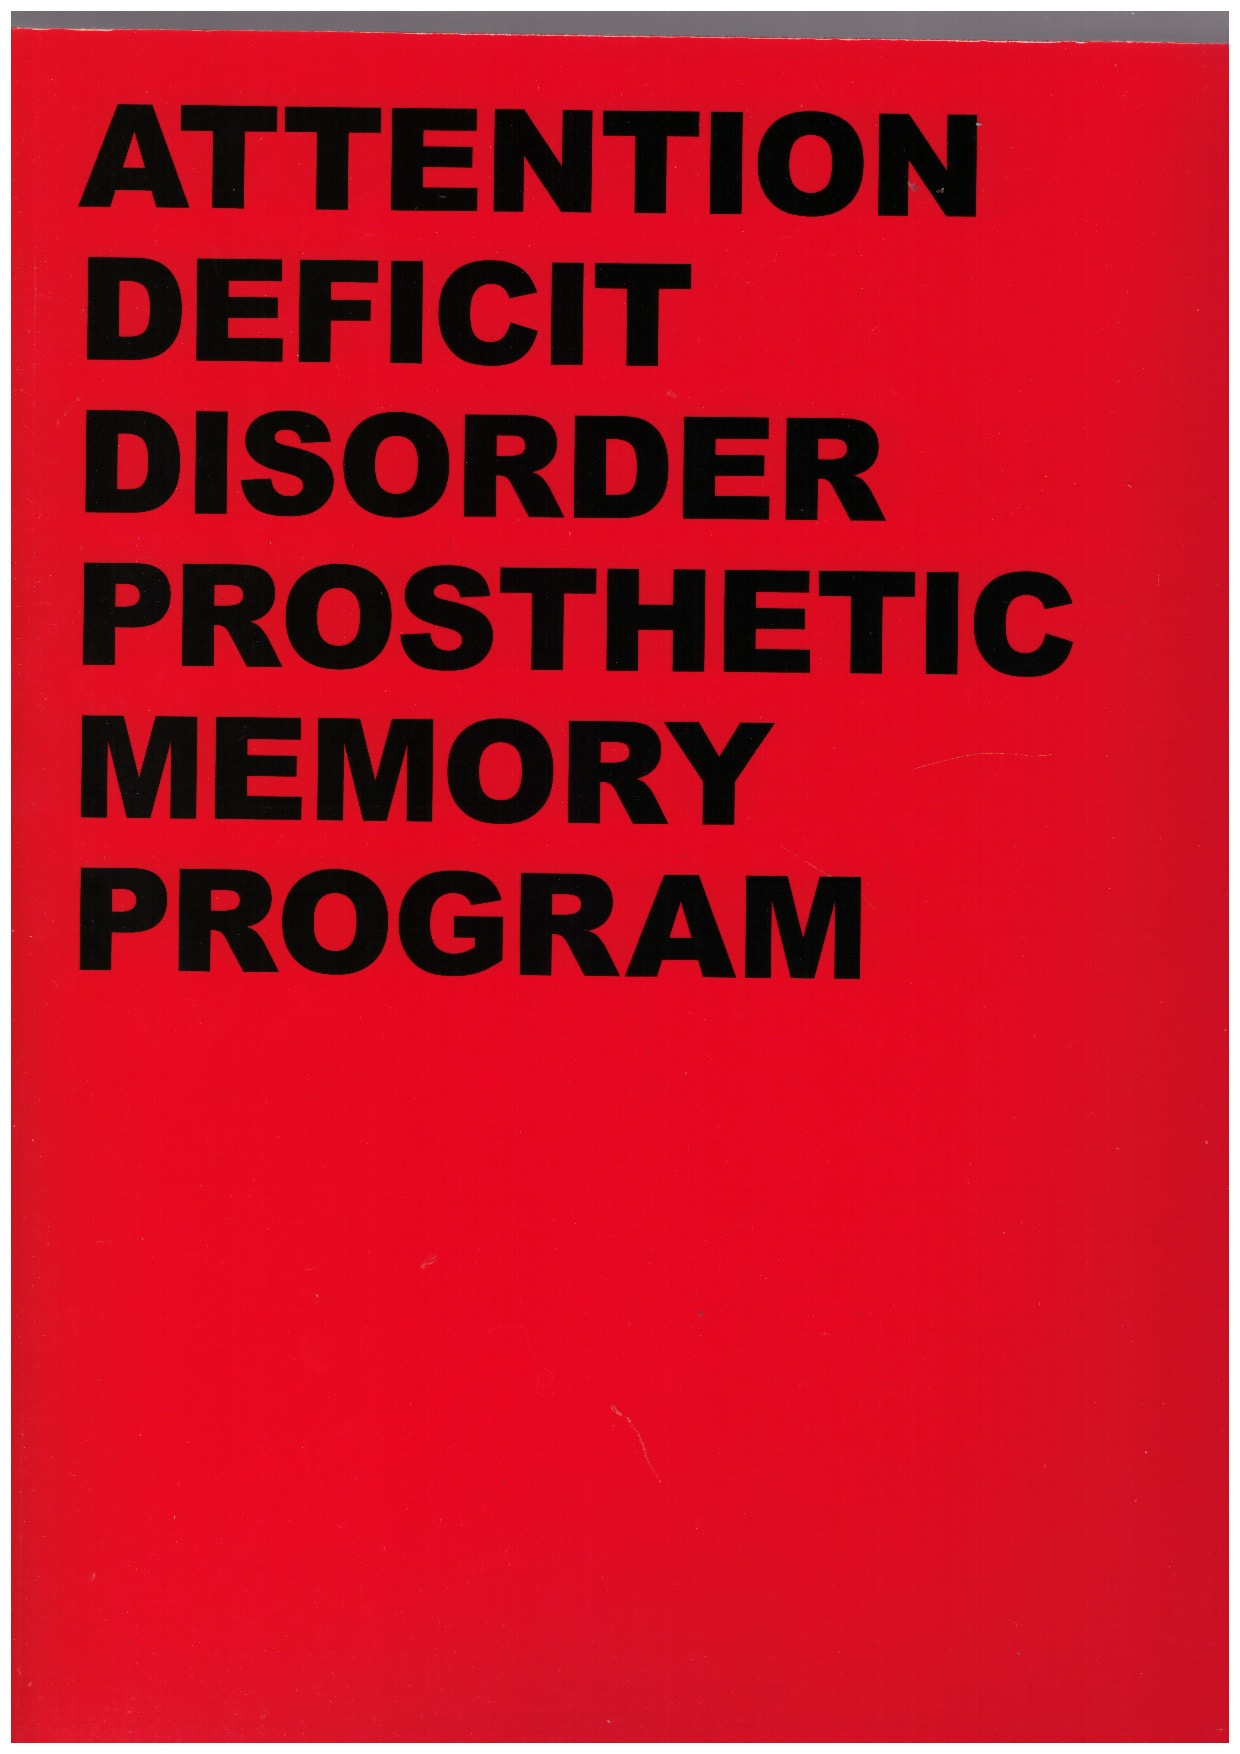 ILL-STUDIO; GENERAL_INDEX (eds.) - ADDPMP [001-500]. Attention Deficit Disorder Prosthetic Memory Program